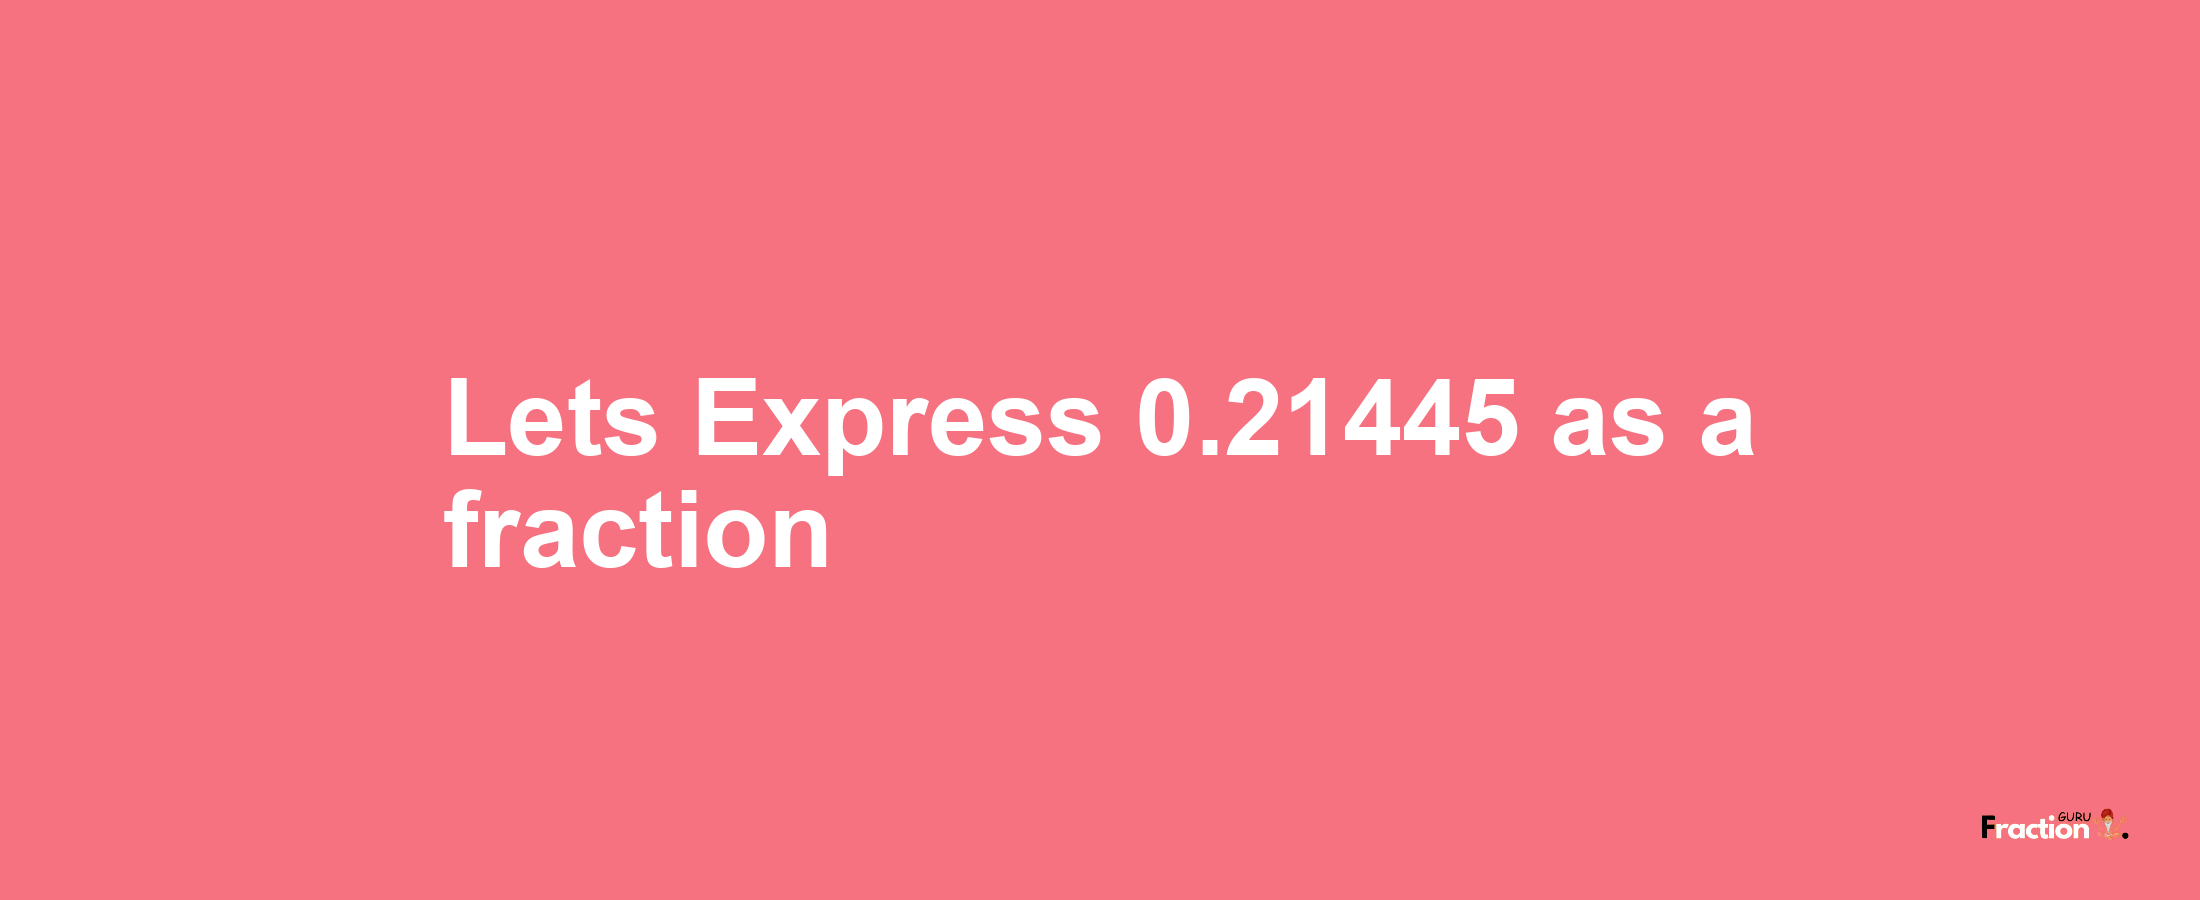 Lets Express 0.21445 as afraction